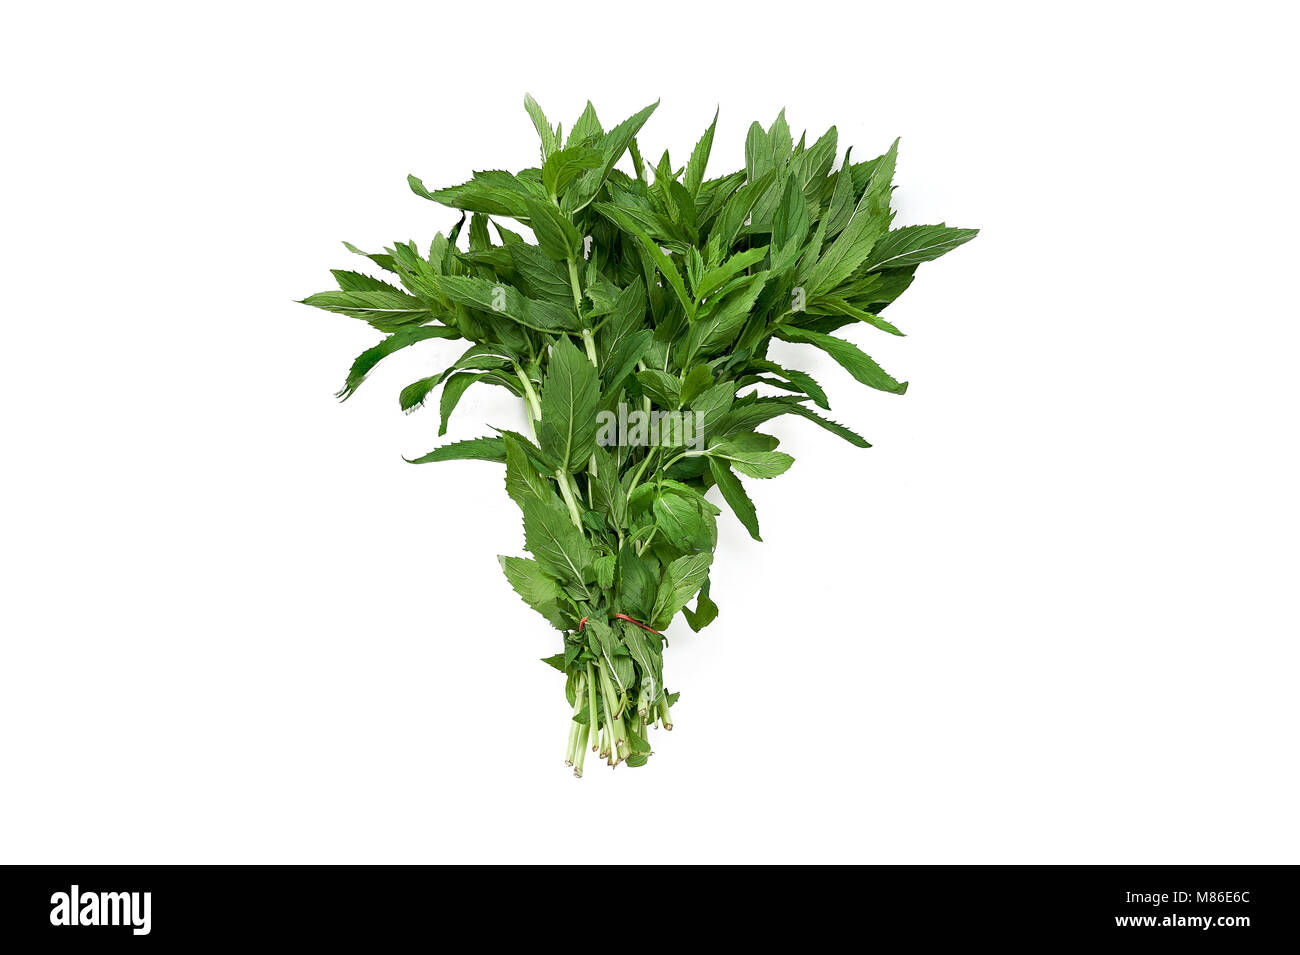 Sweet Vietnamese mint centered and isolated on white background Stock Photo